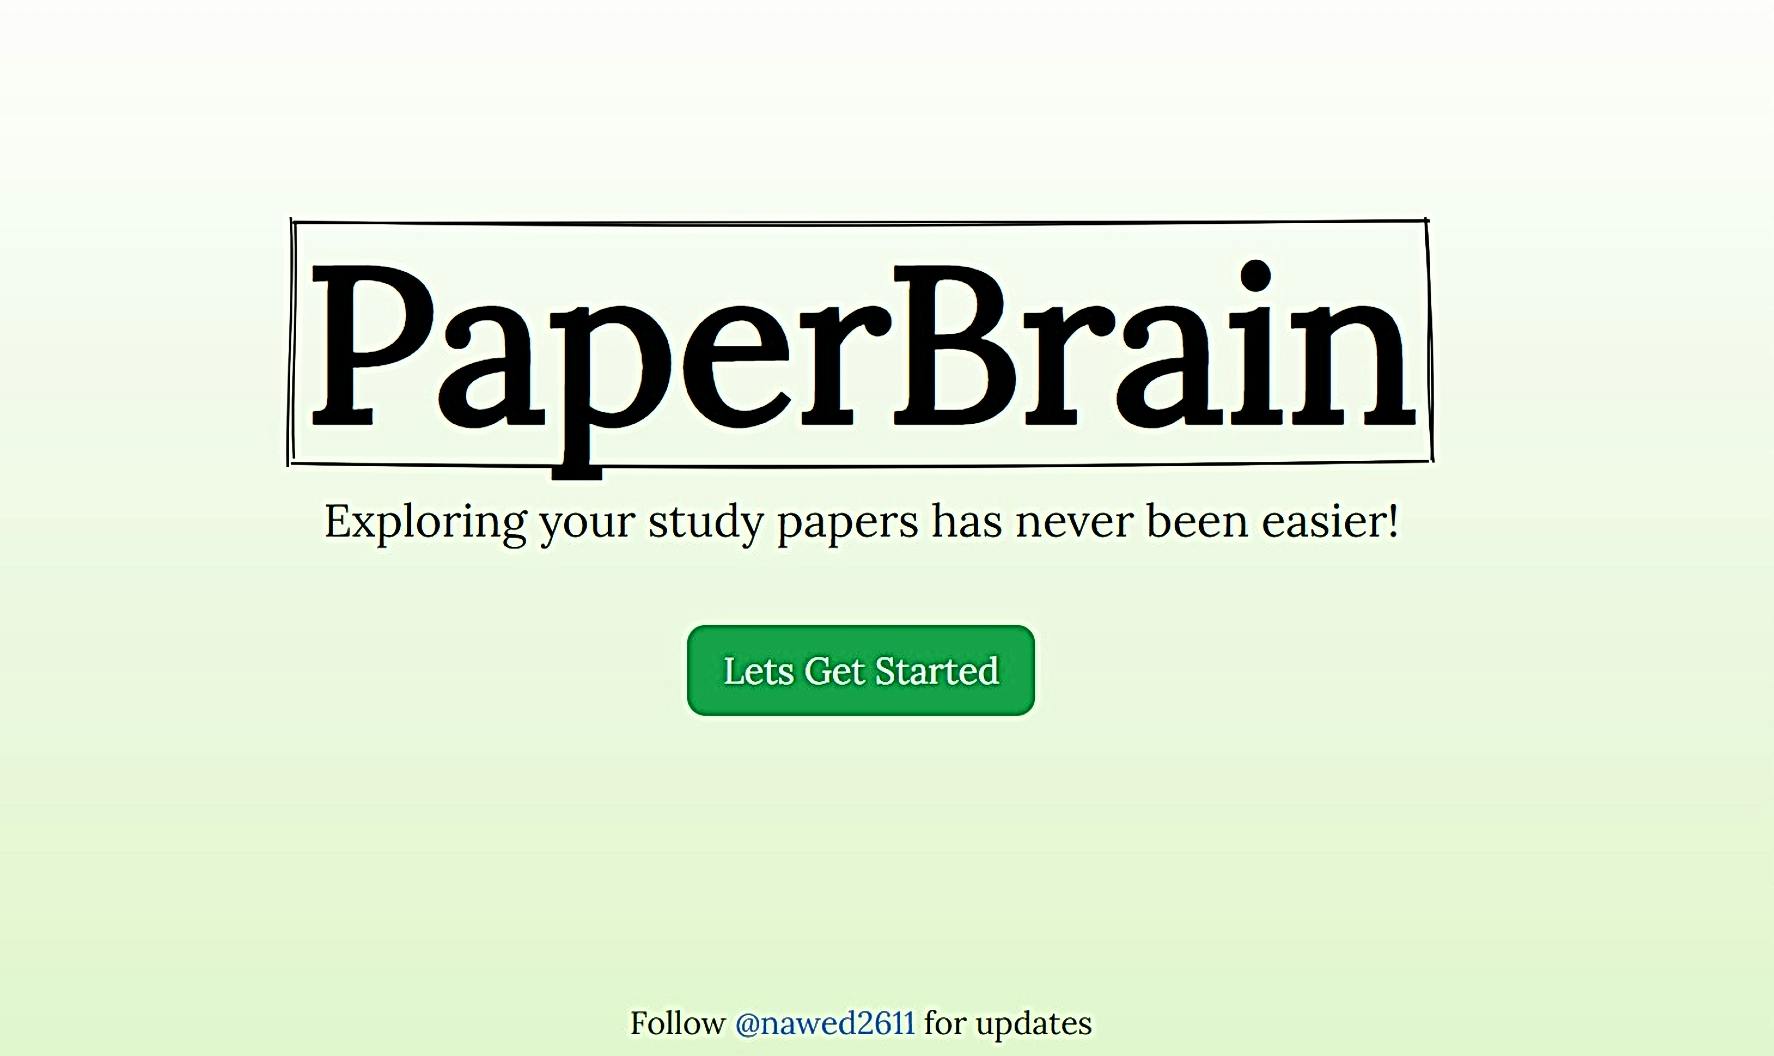 PaperBrain featured